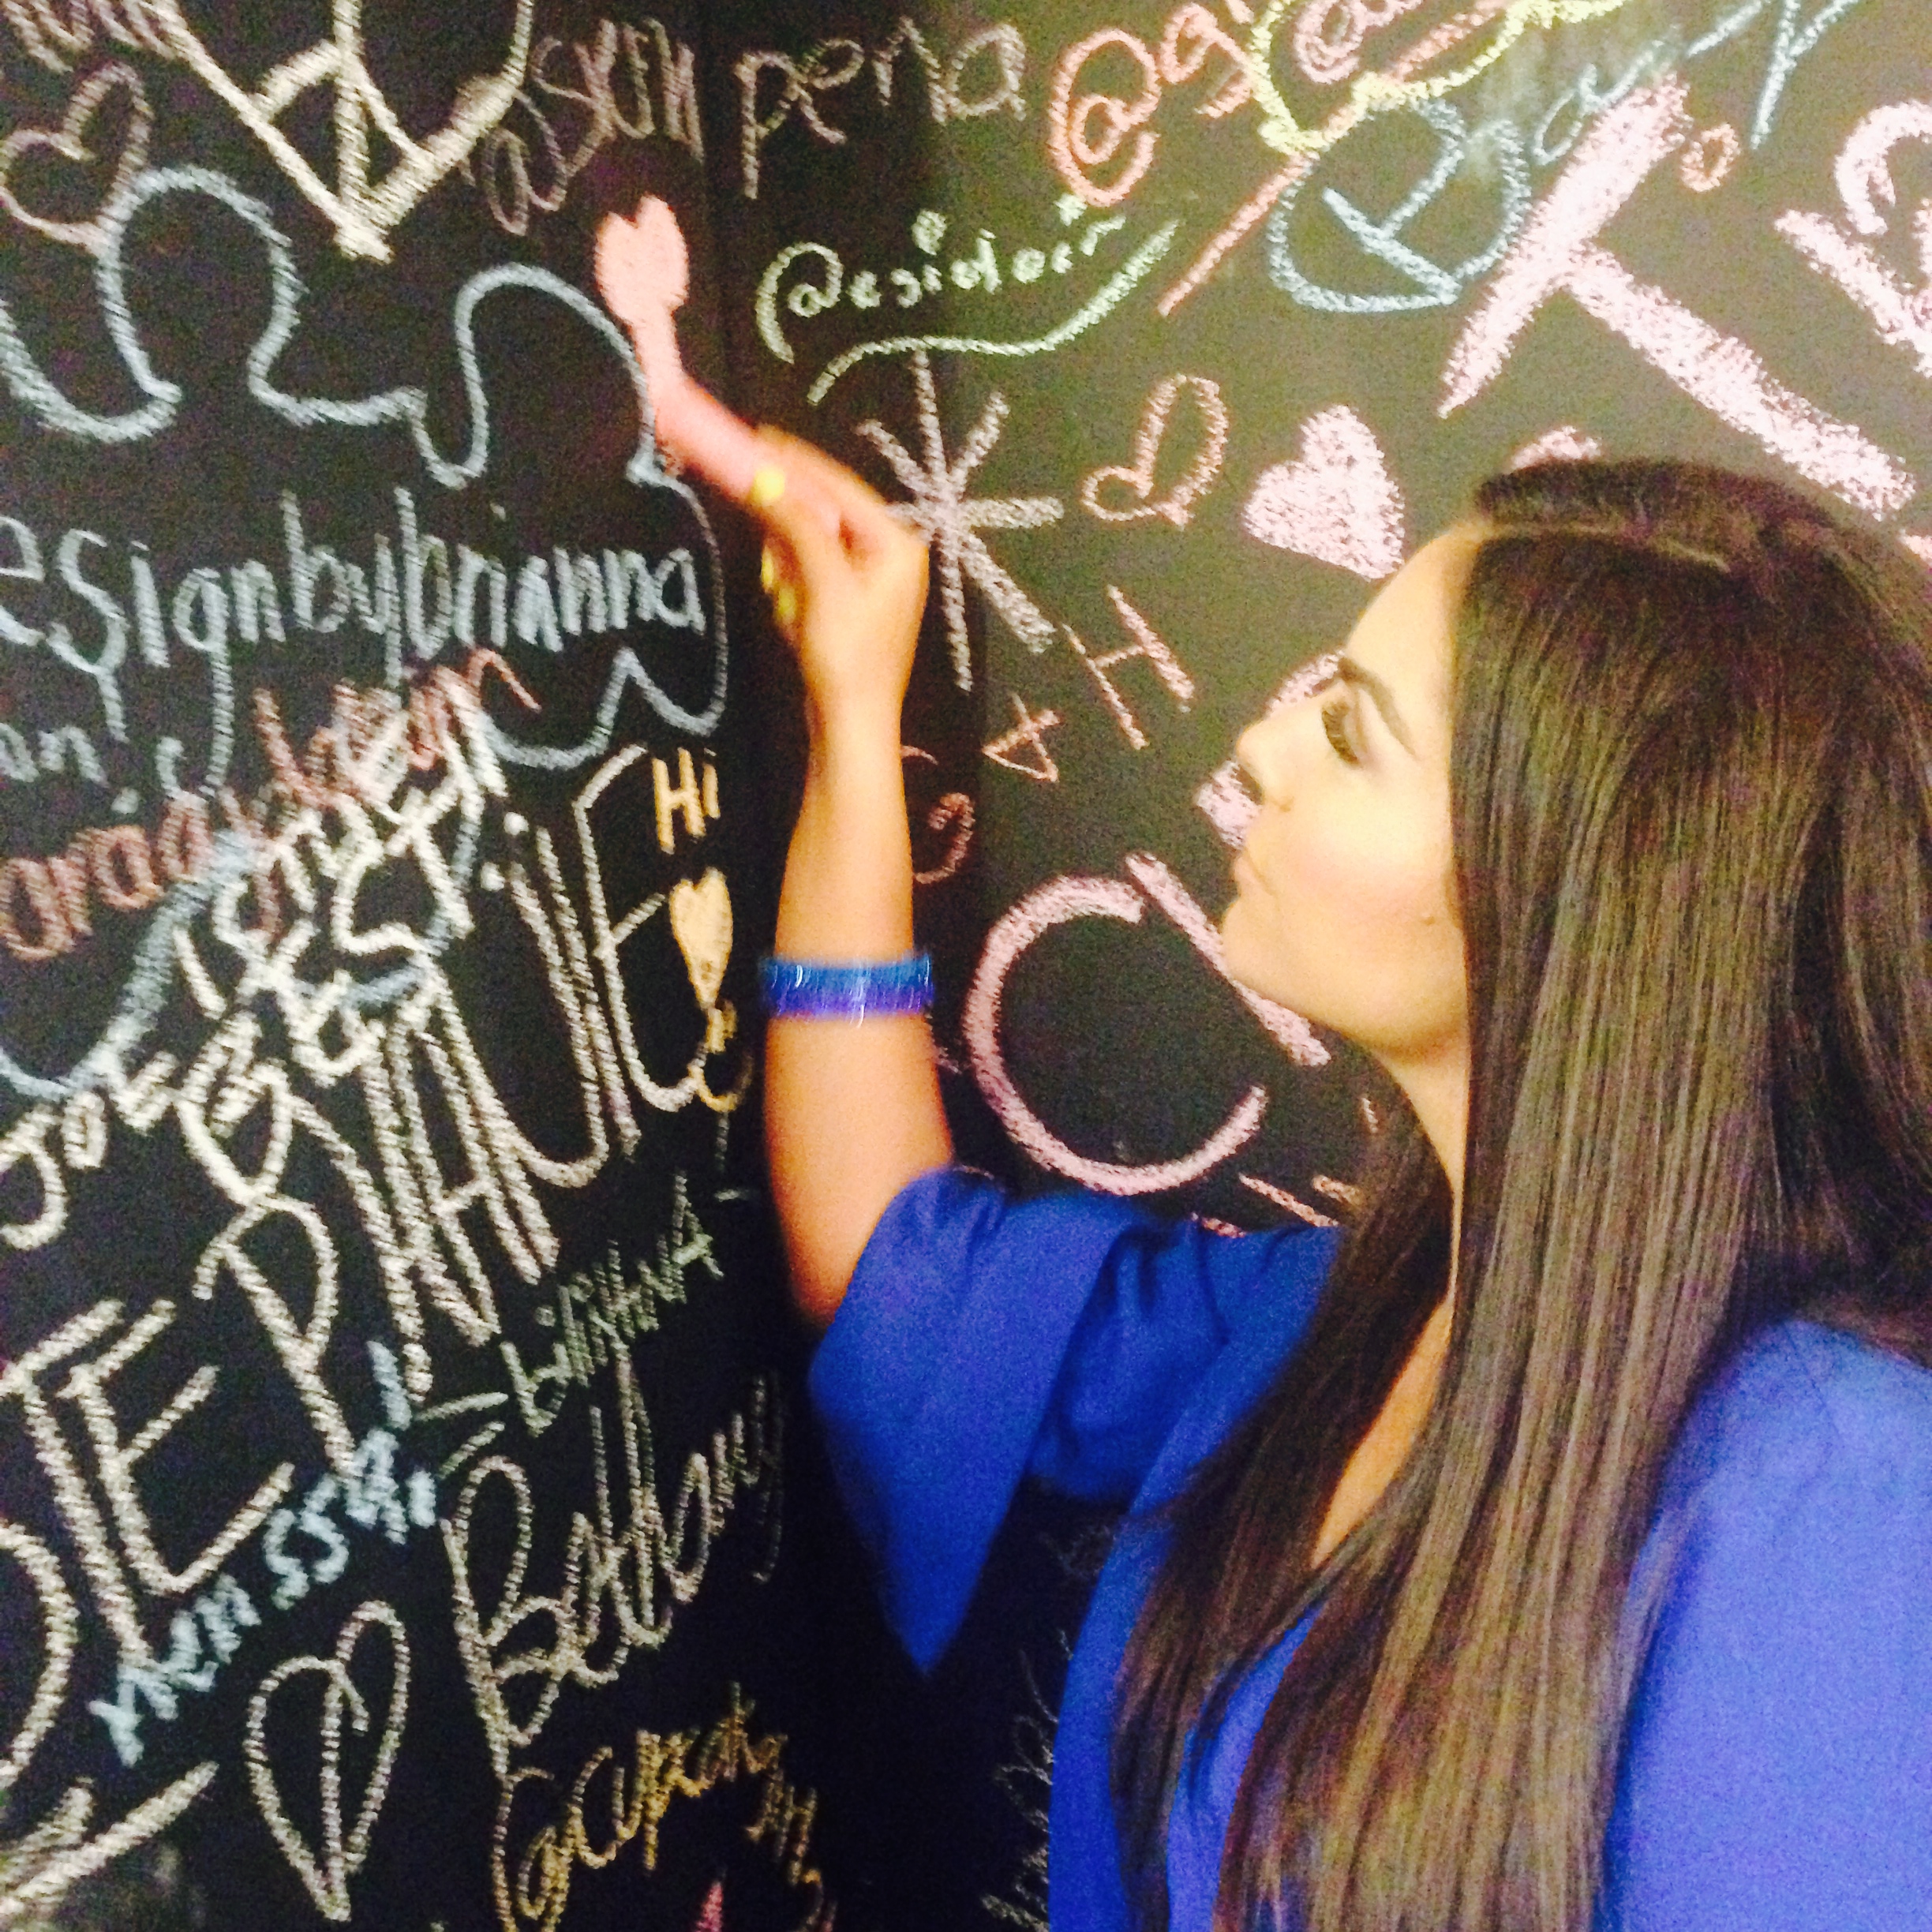 Annabelle drawing a penis on the BeautyCon wall